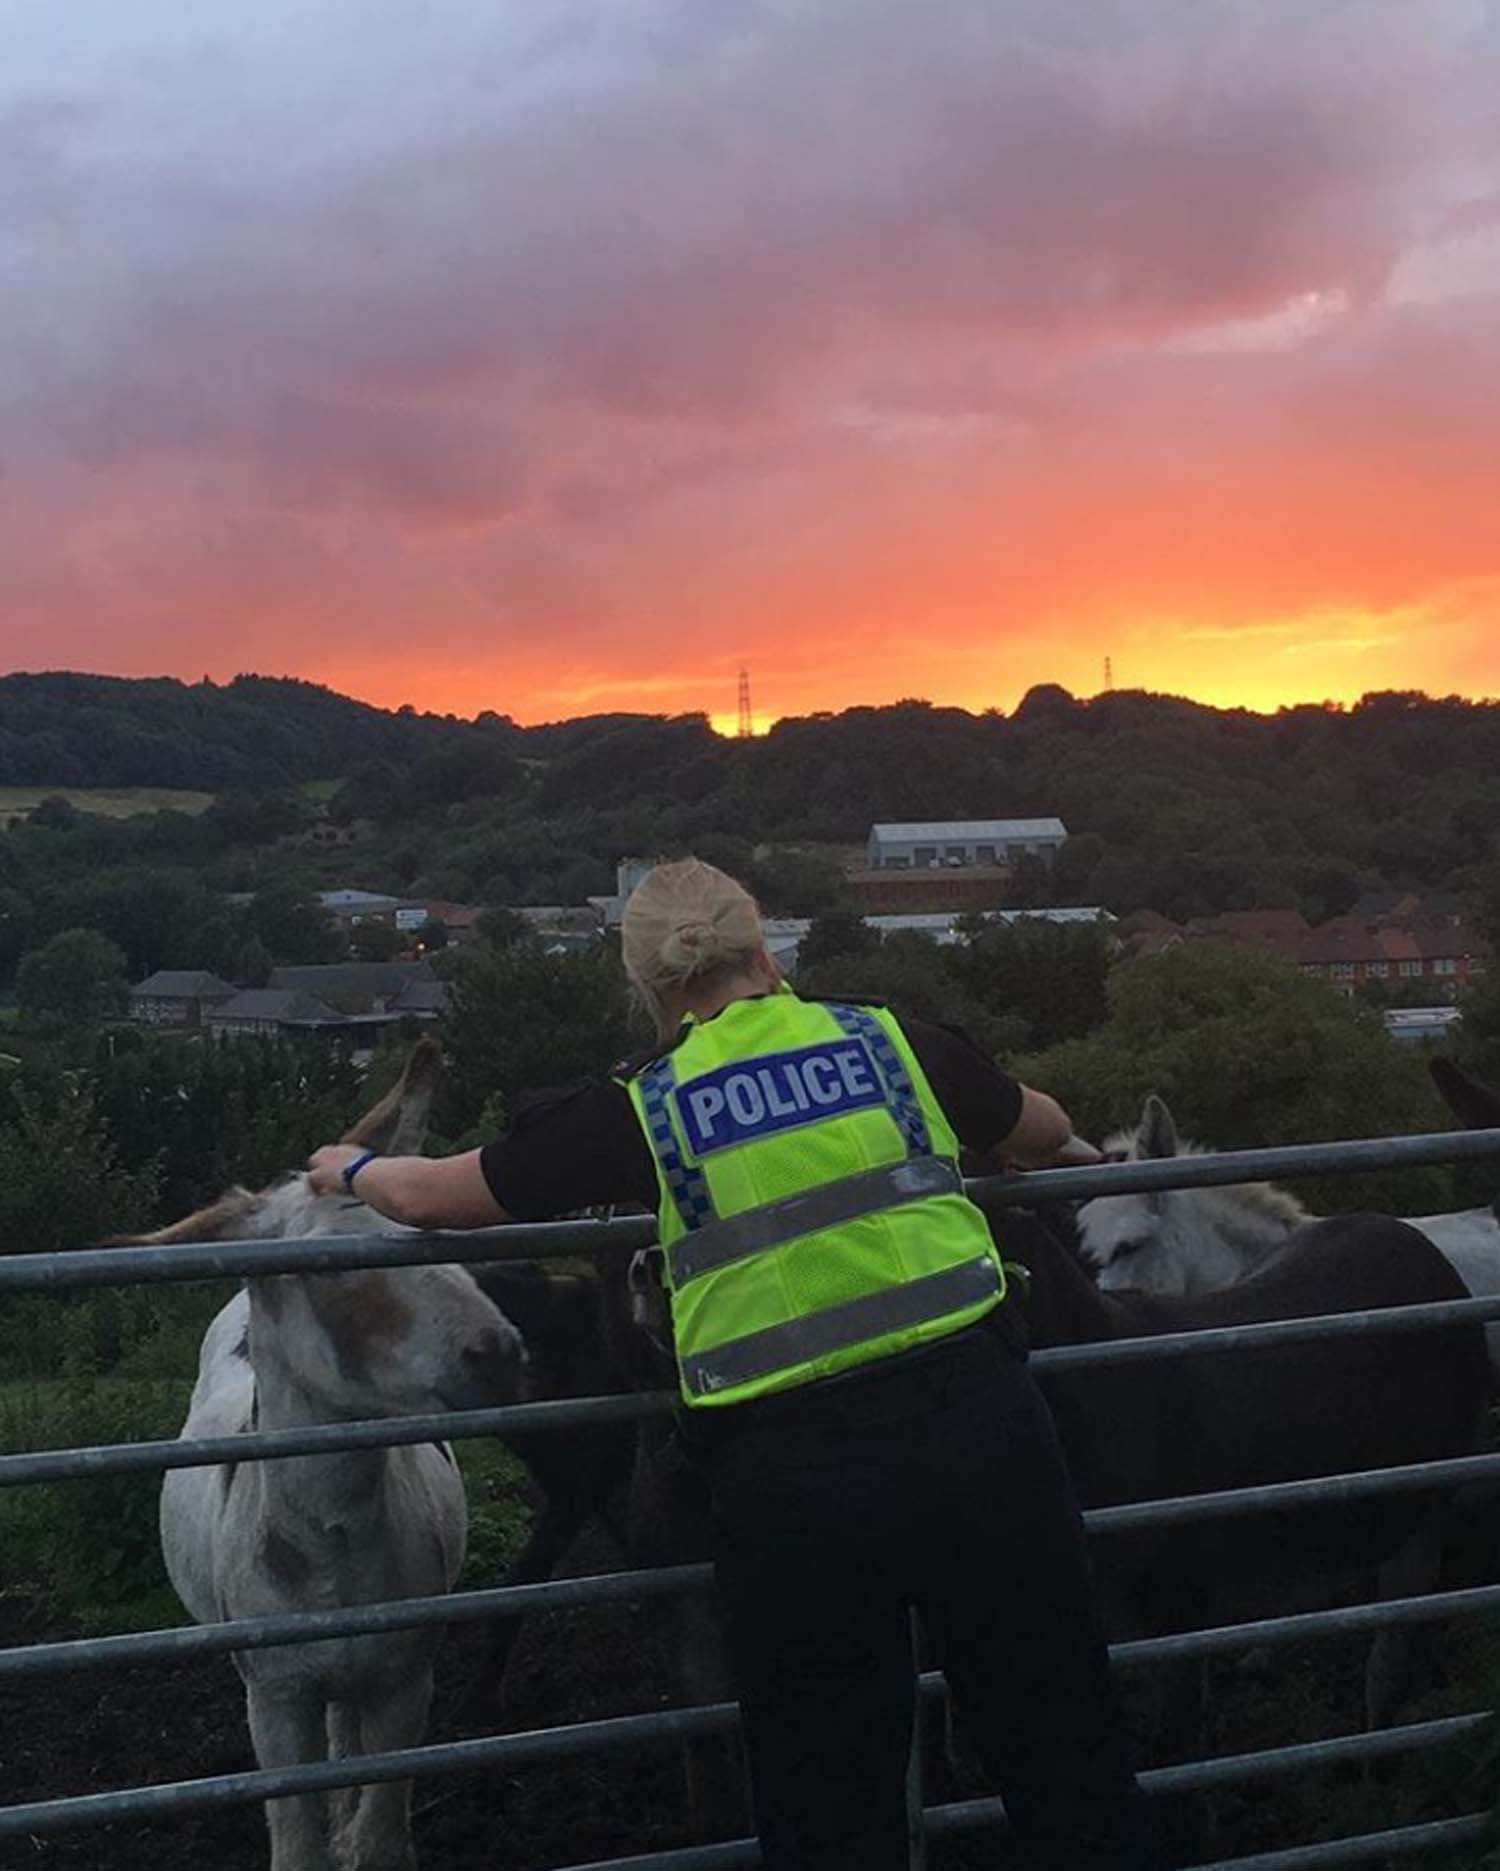 As the sun sets it’s not just humans who need a welfare check